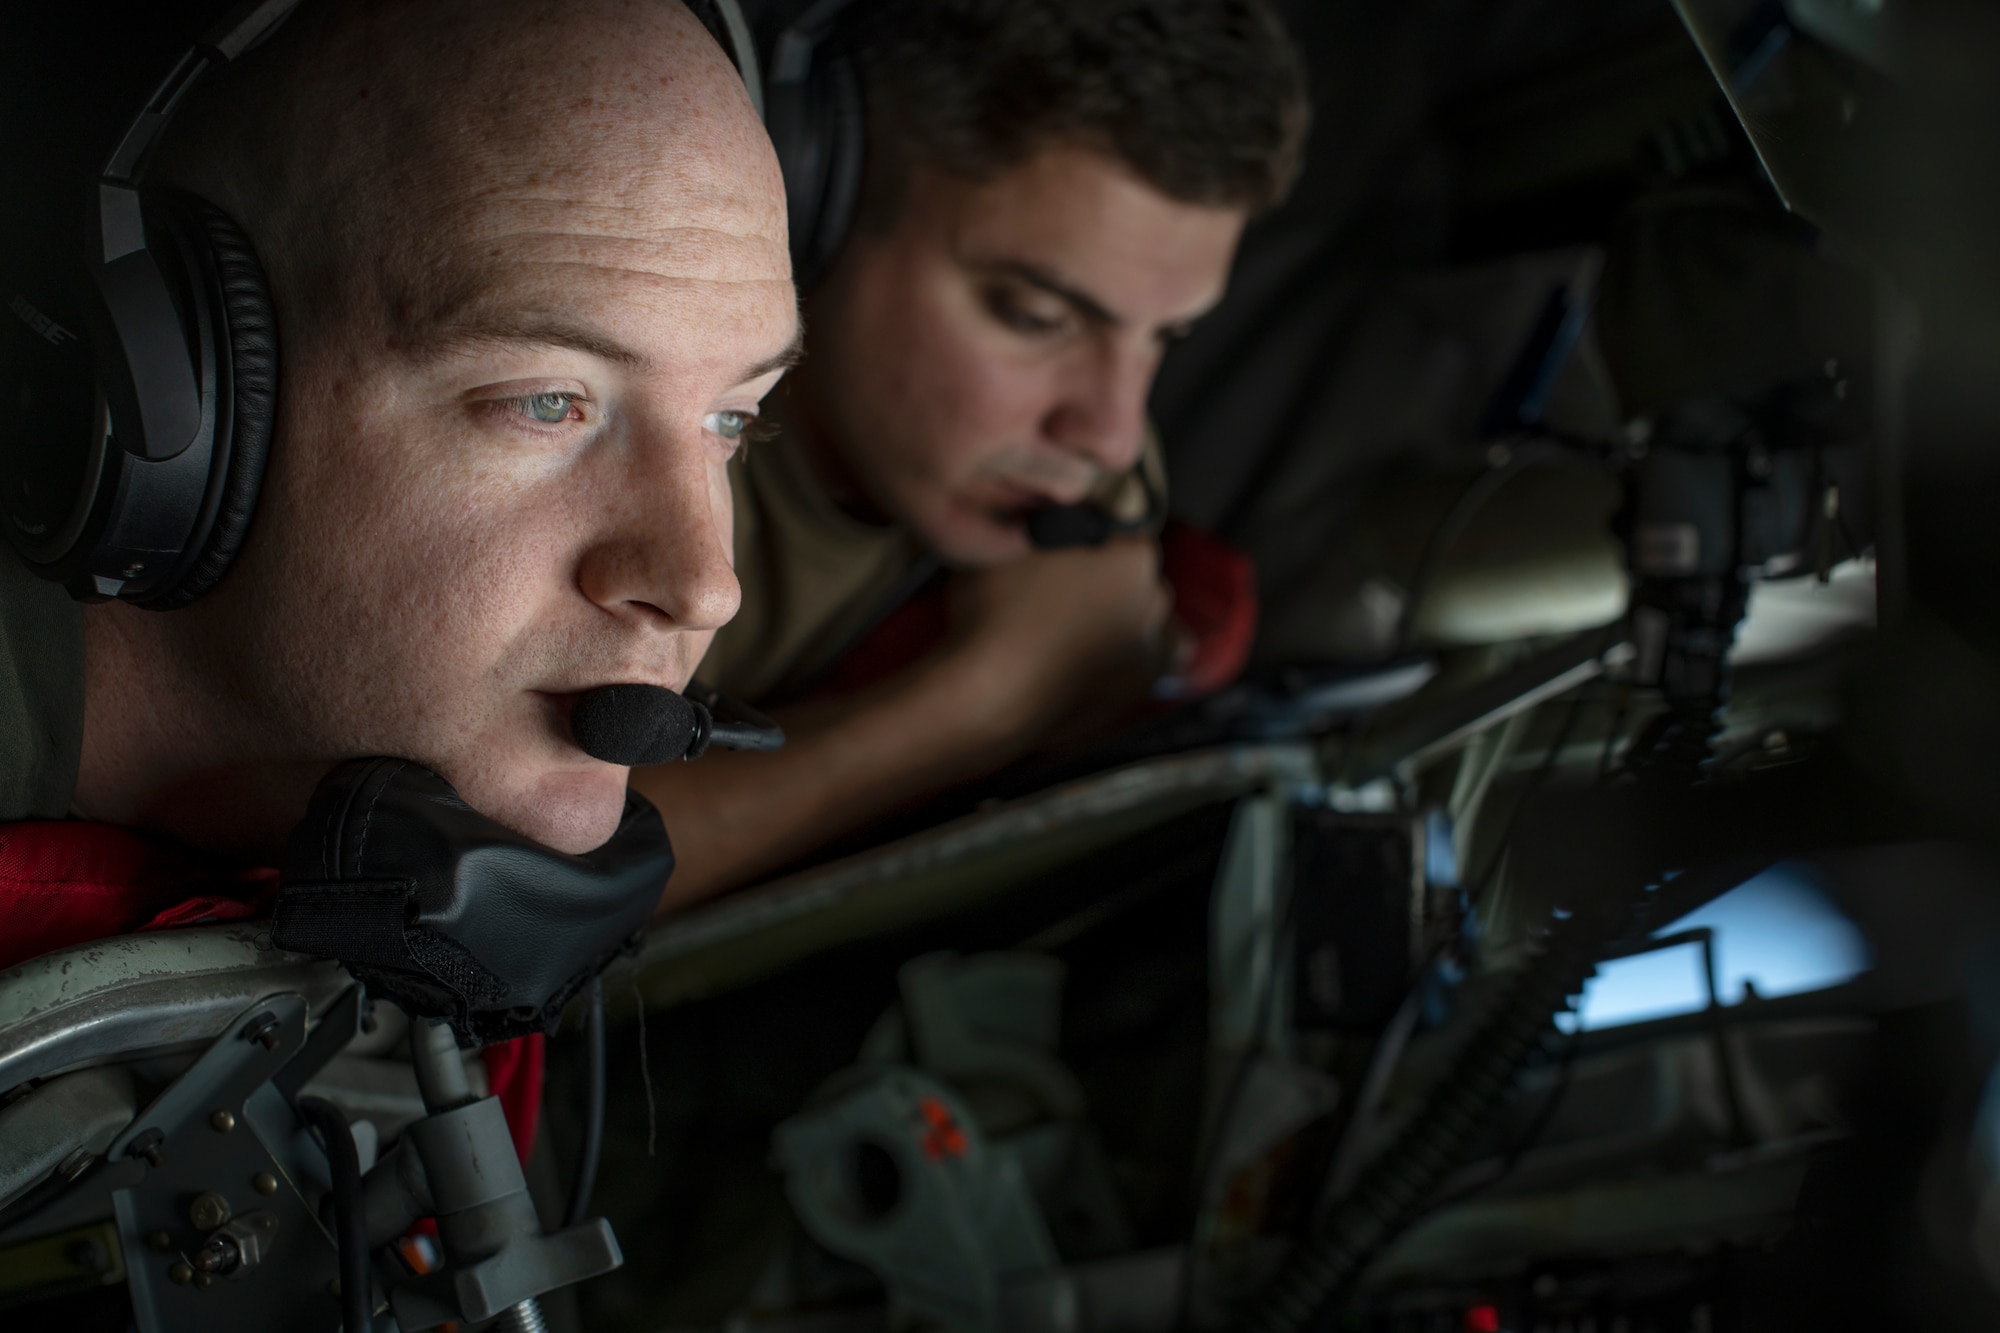 U.S. Air Force SSgt. Andrew Chase, 909th ARS boom operator, delivers fuel to an F-15C Eagle during a flight over the Pacific Ocean in support of exercise Keen Sword 23, Nov. 17, 2022. Bilateral exercises allow U.S. military and Japan Self-Defense Forces to work together across a variety of areas to enhance interoperability and readiness. (U.S. Air Force photo by Senior Airman Jessi Roth)